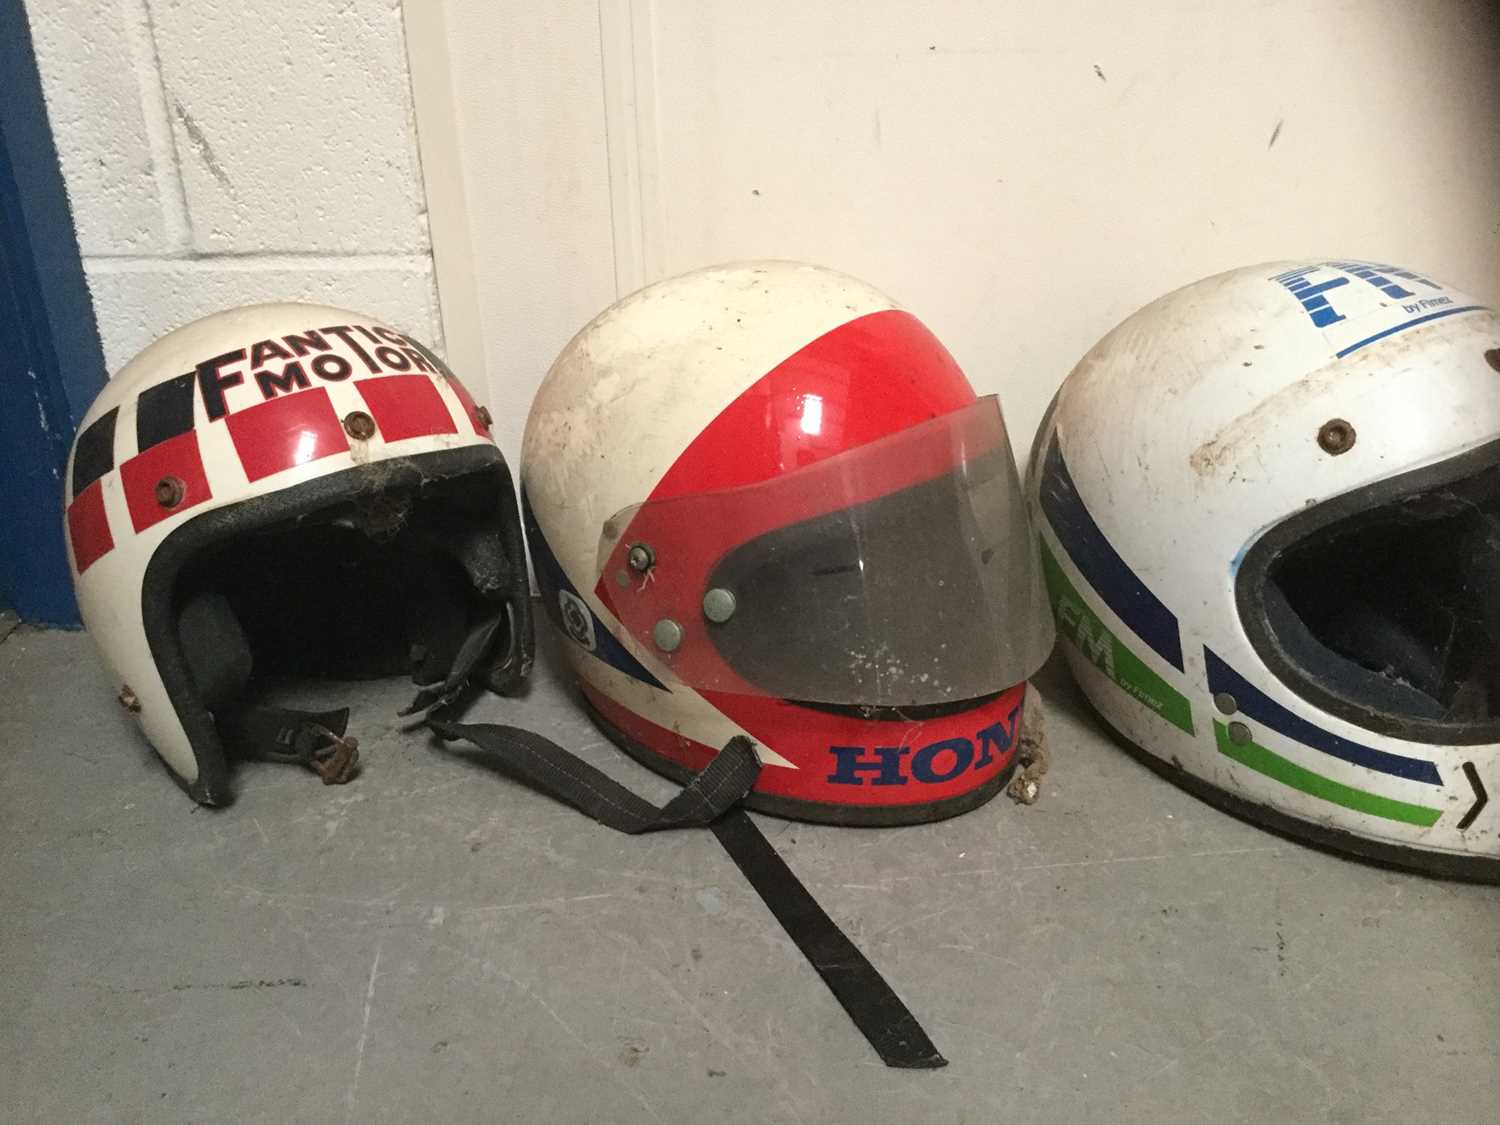 Three vintage motorcycle leathers together with a selection of motorcycle helmets - Image 4 of 4